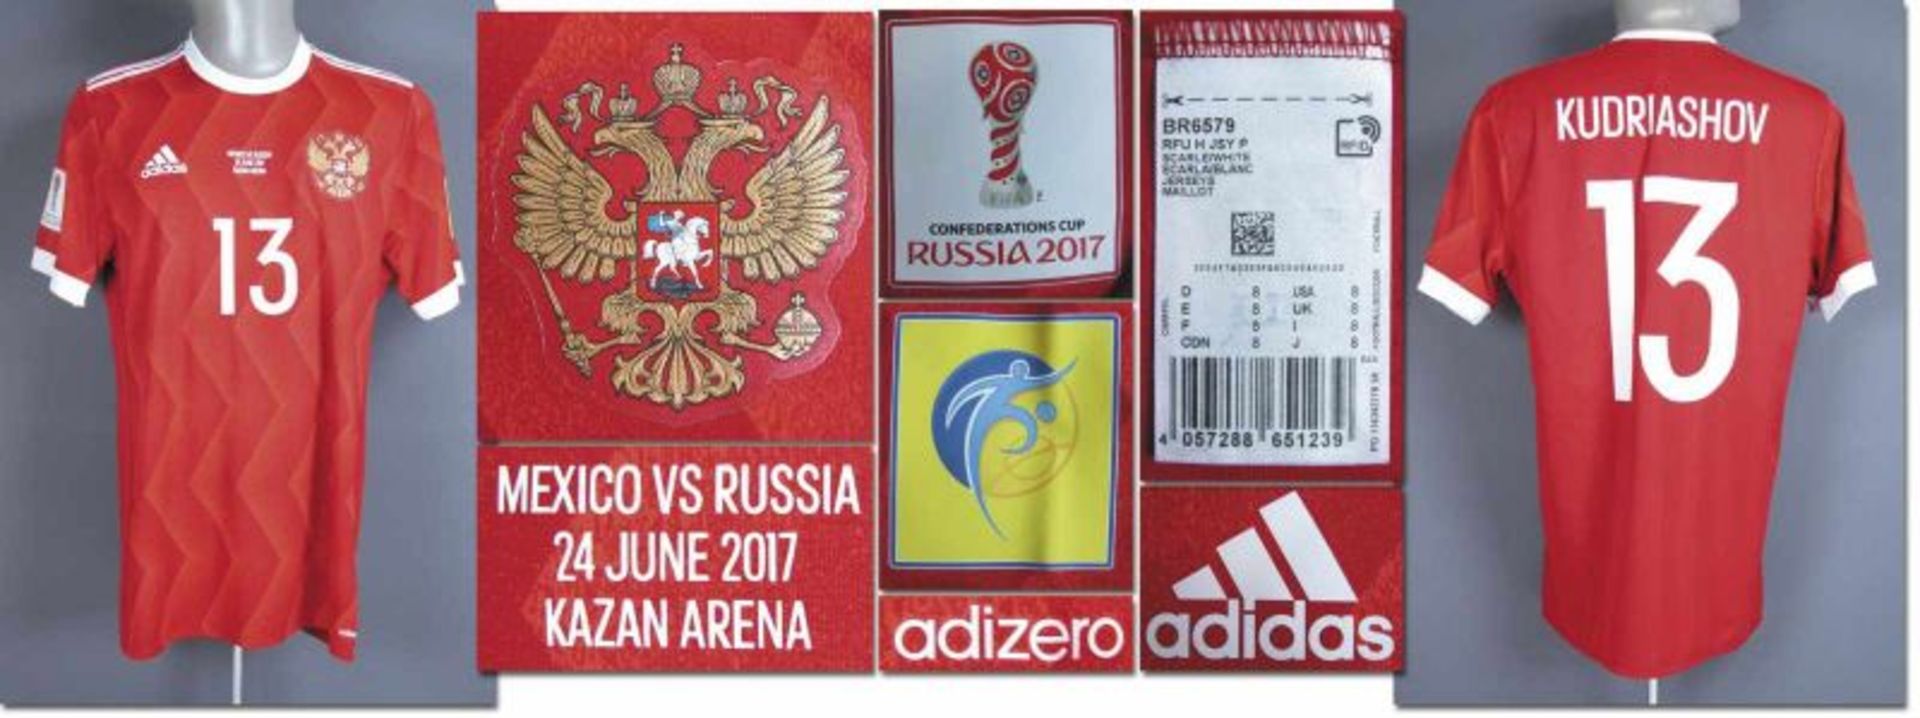 Confed Cup 2017 match worn football shirt Russia - Original match worn shirt Russia with number